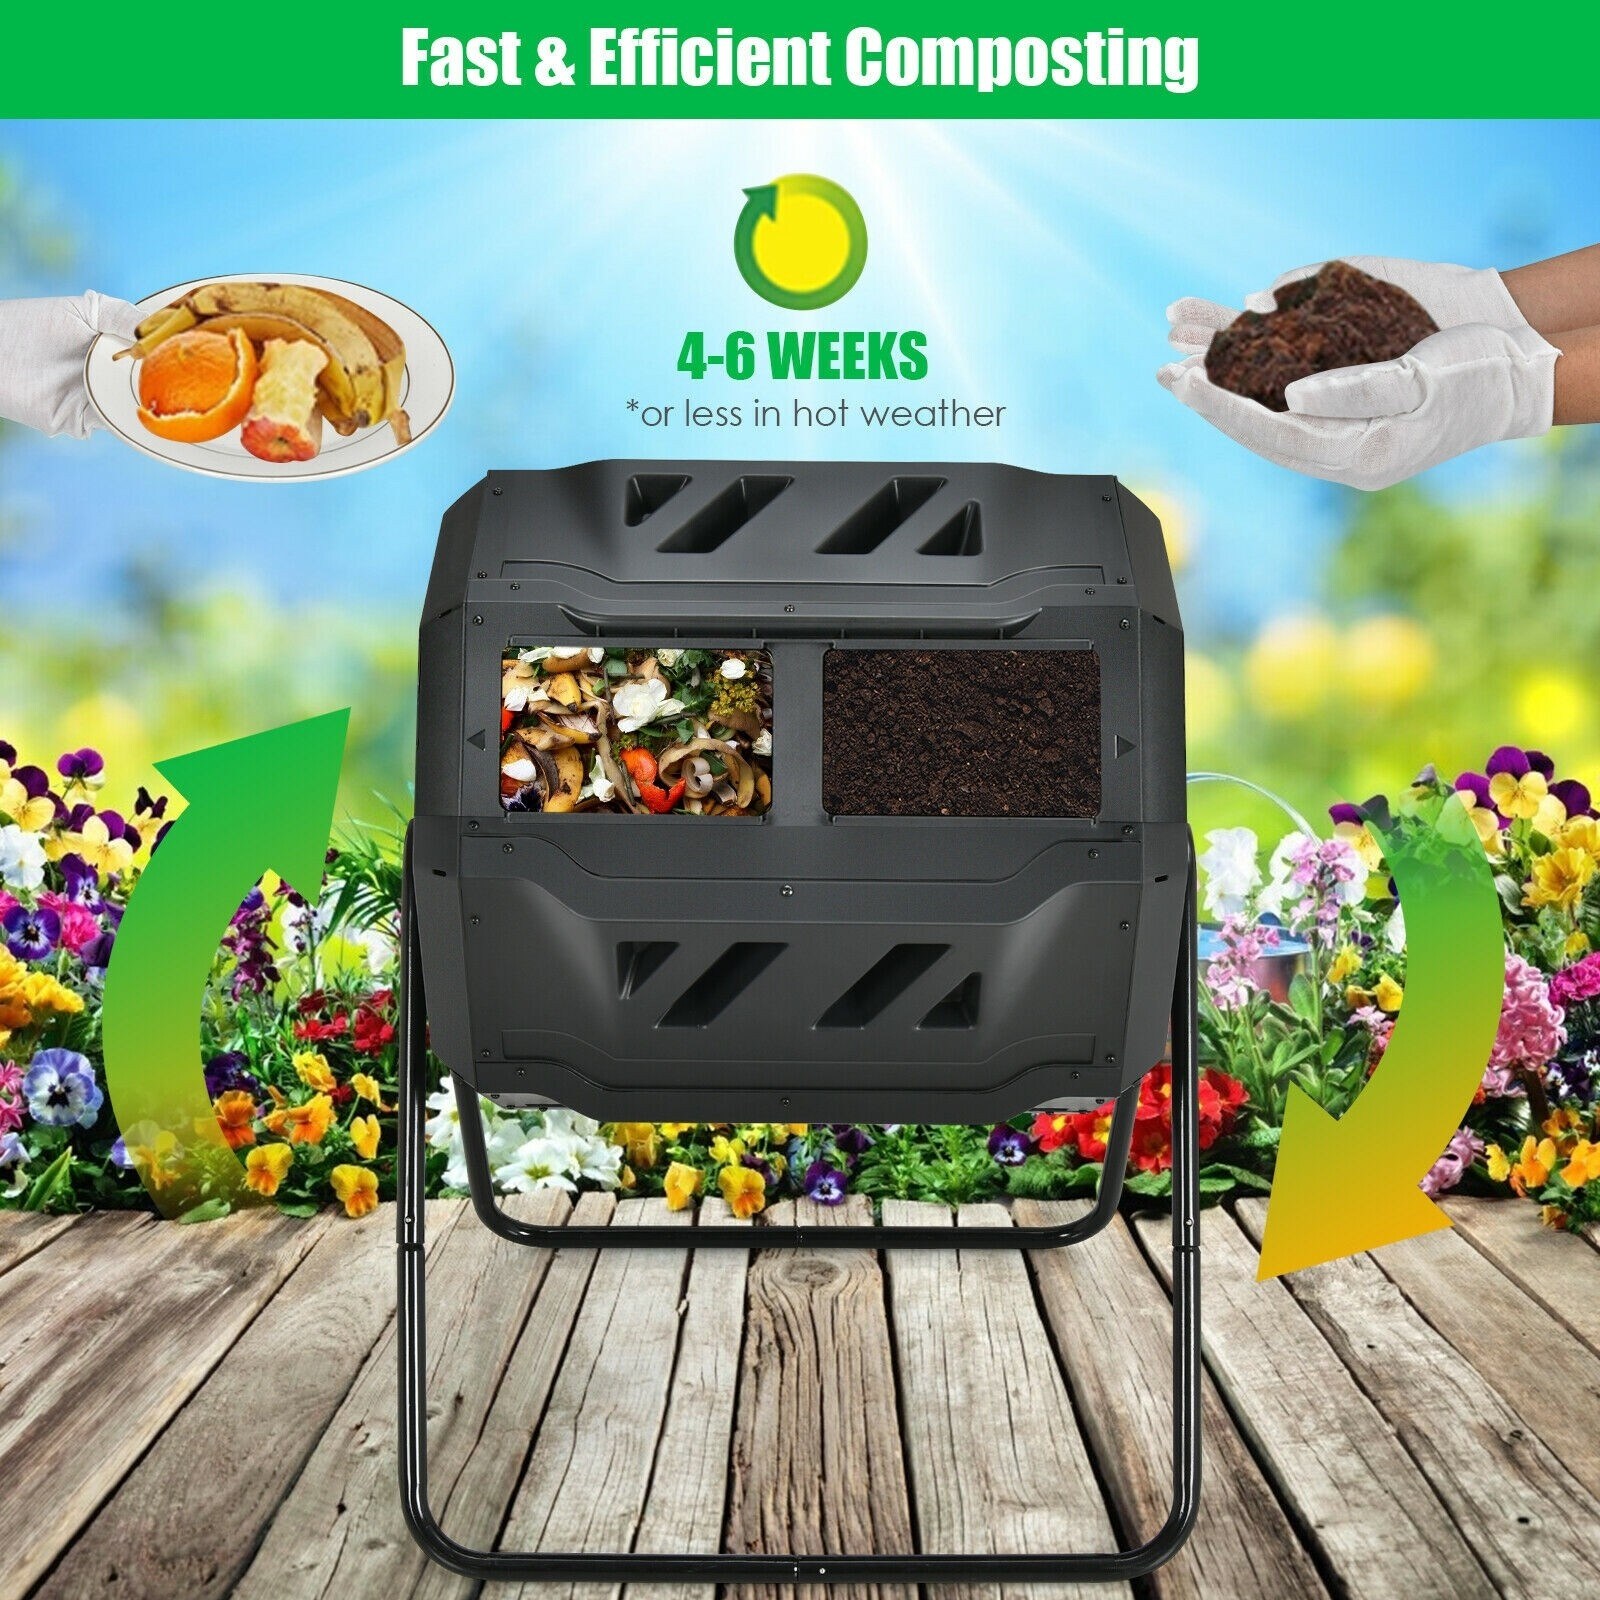 https://ak1.ostkcdn.com/images/products/is/images/direct/3be0f4c1c1517fd035aac8406daed3cf6524cb4b/43-Gallon-Composting-Tumbler-Compost-Bin-with-Dual-Rotating-Chamber.jpg